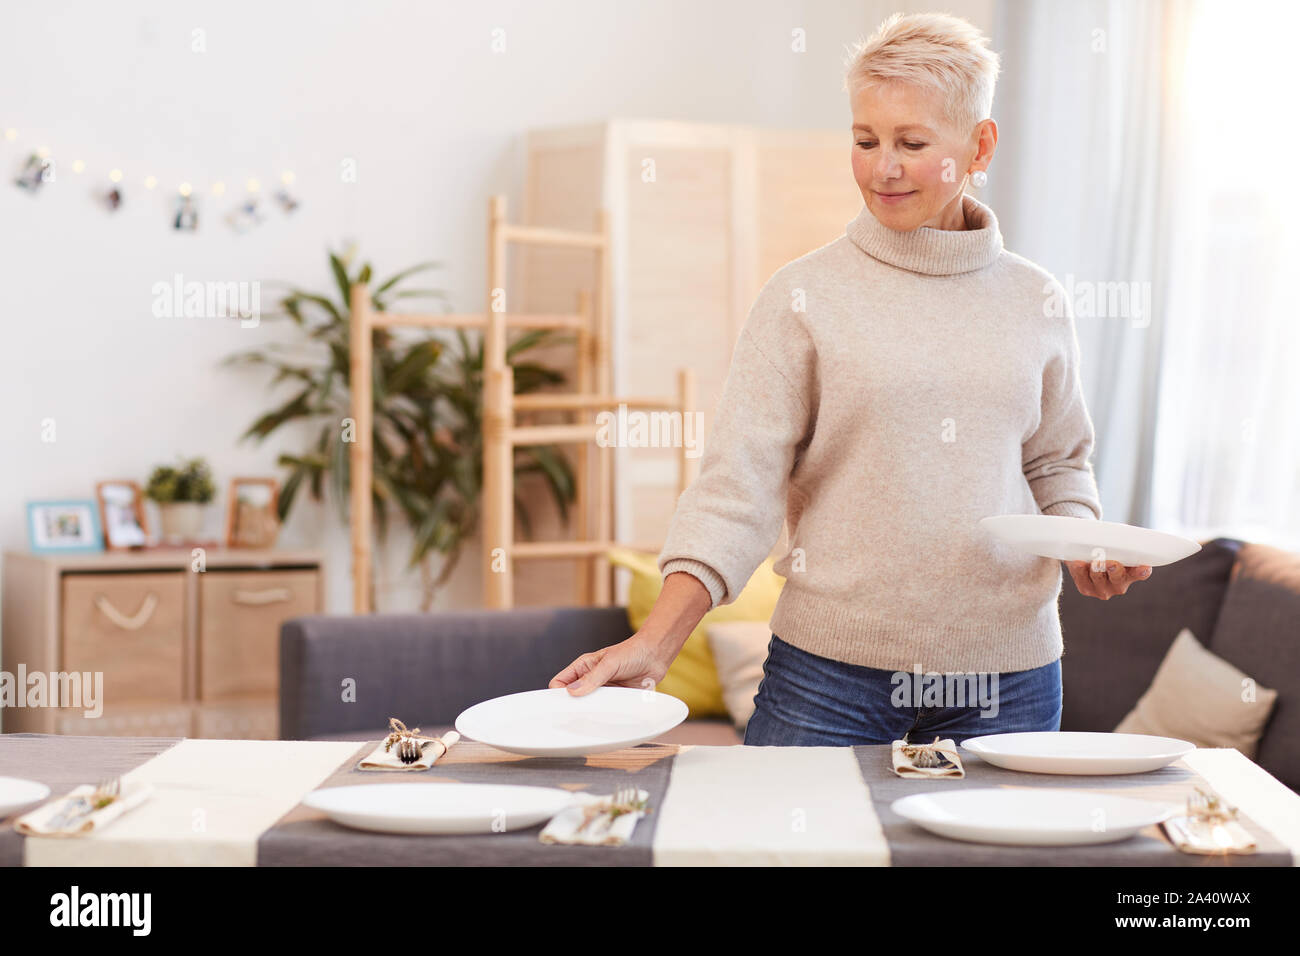 Mature woman with short blond hair putting plate on the table and serving the table before the family dinner at home Stock Photo